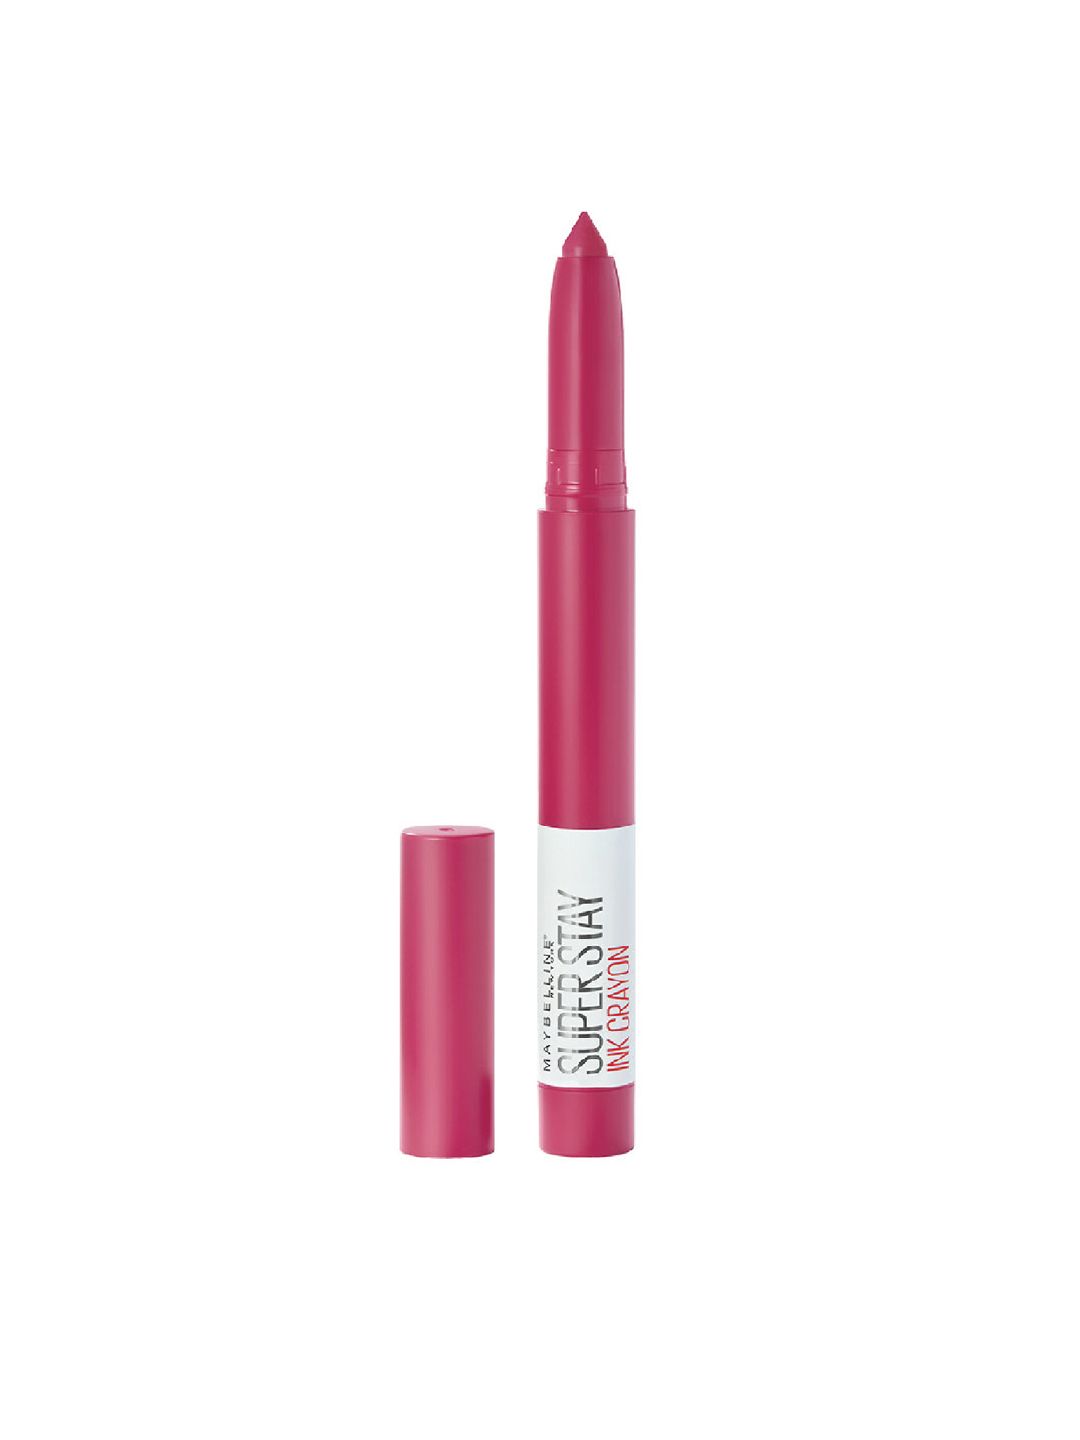 Maybelline New York Superstay Matte Ink Crayon Lipstick- Treat Yourself 35 1.2 g Price in India